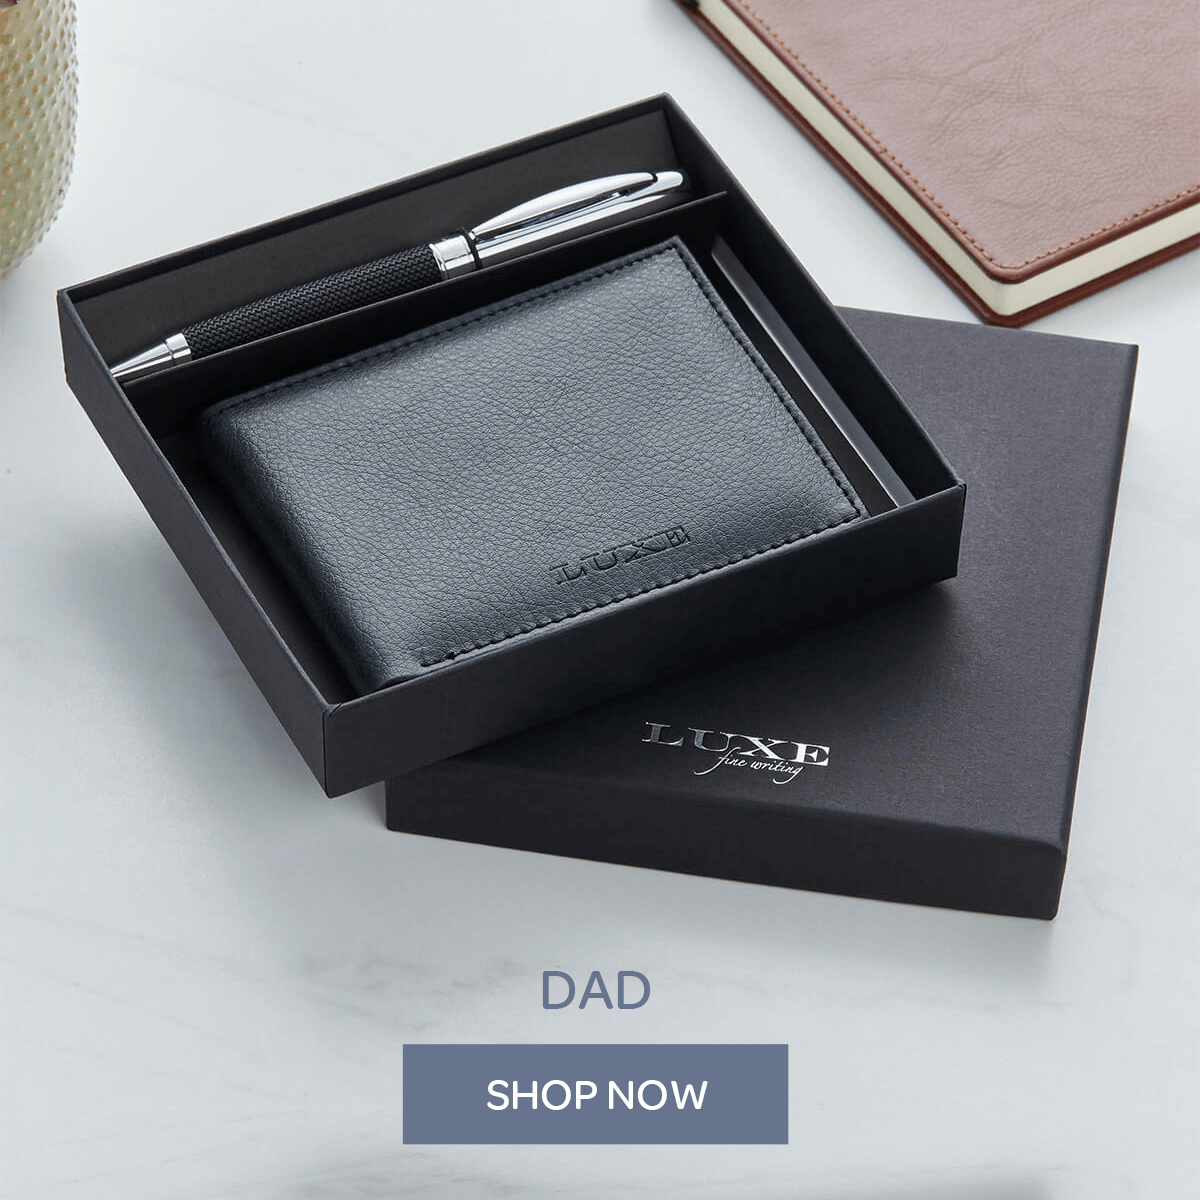 Luxury Gifts for Men: Father's Day Gifts for Him